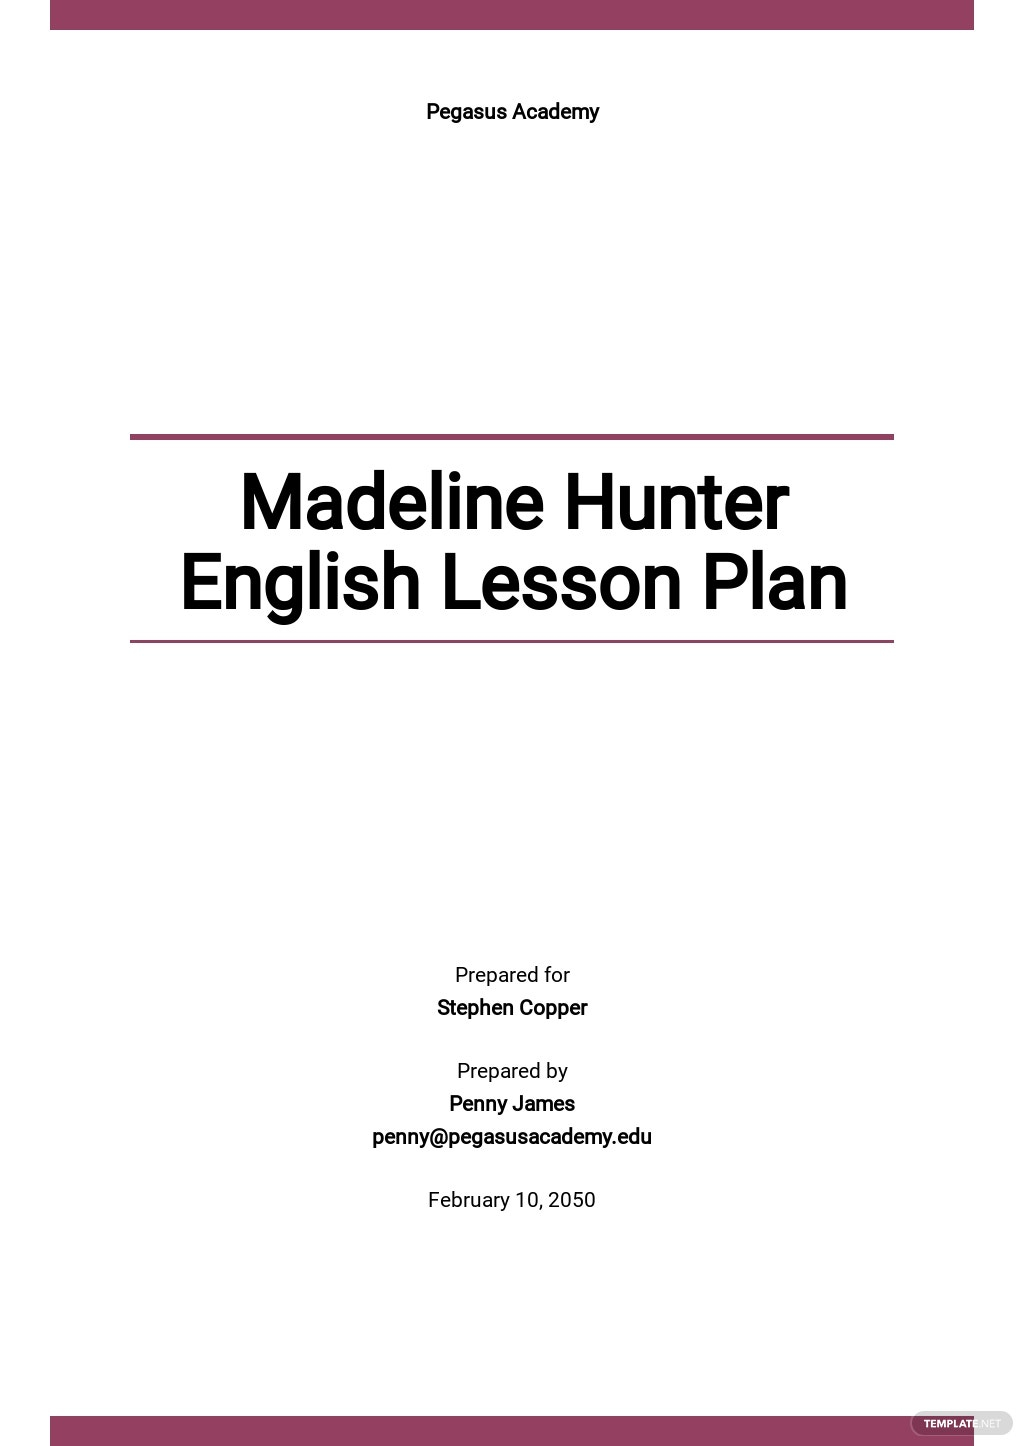 Madeline Hunter English Lesson Plan Template - Google Docs  Intended For Madeline Hunter Lesson Plan Template Blank